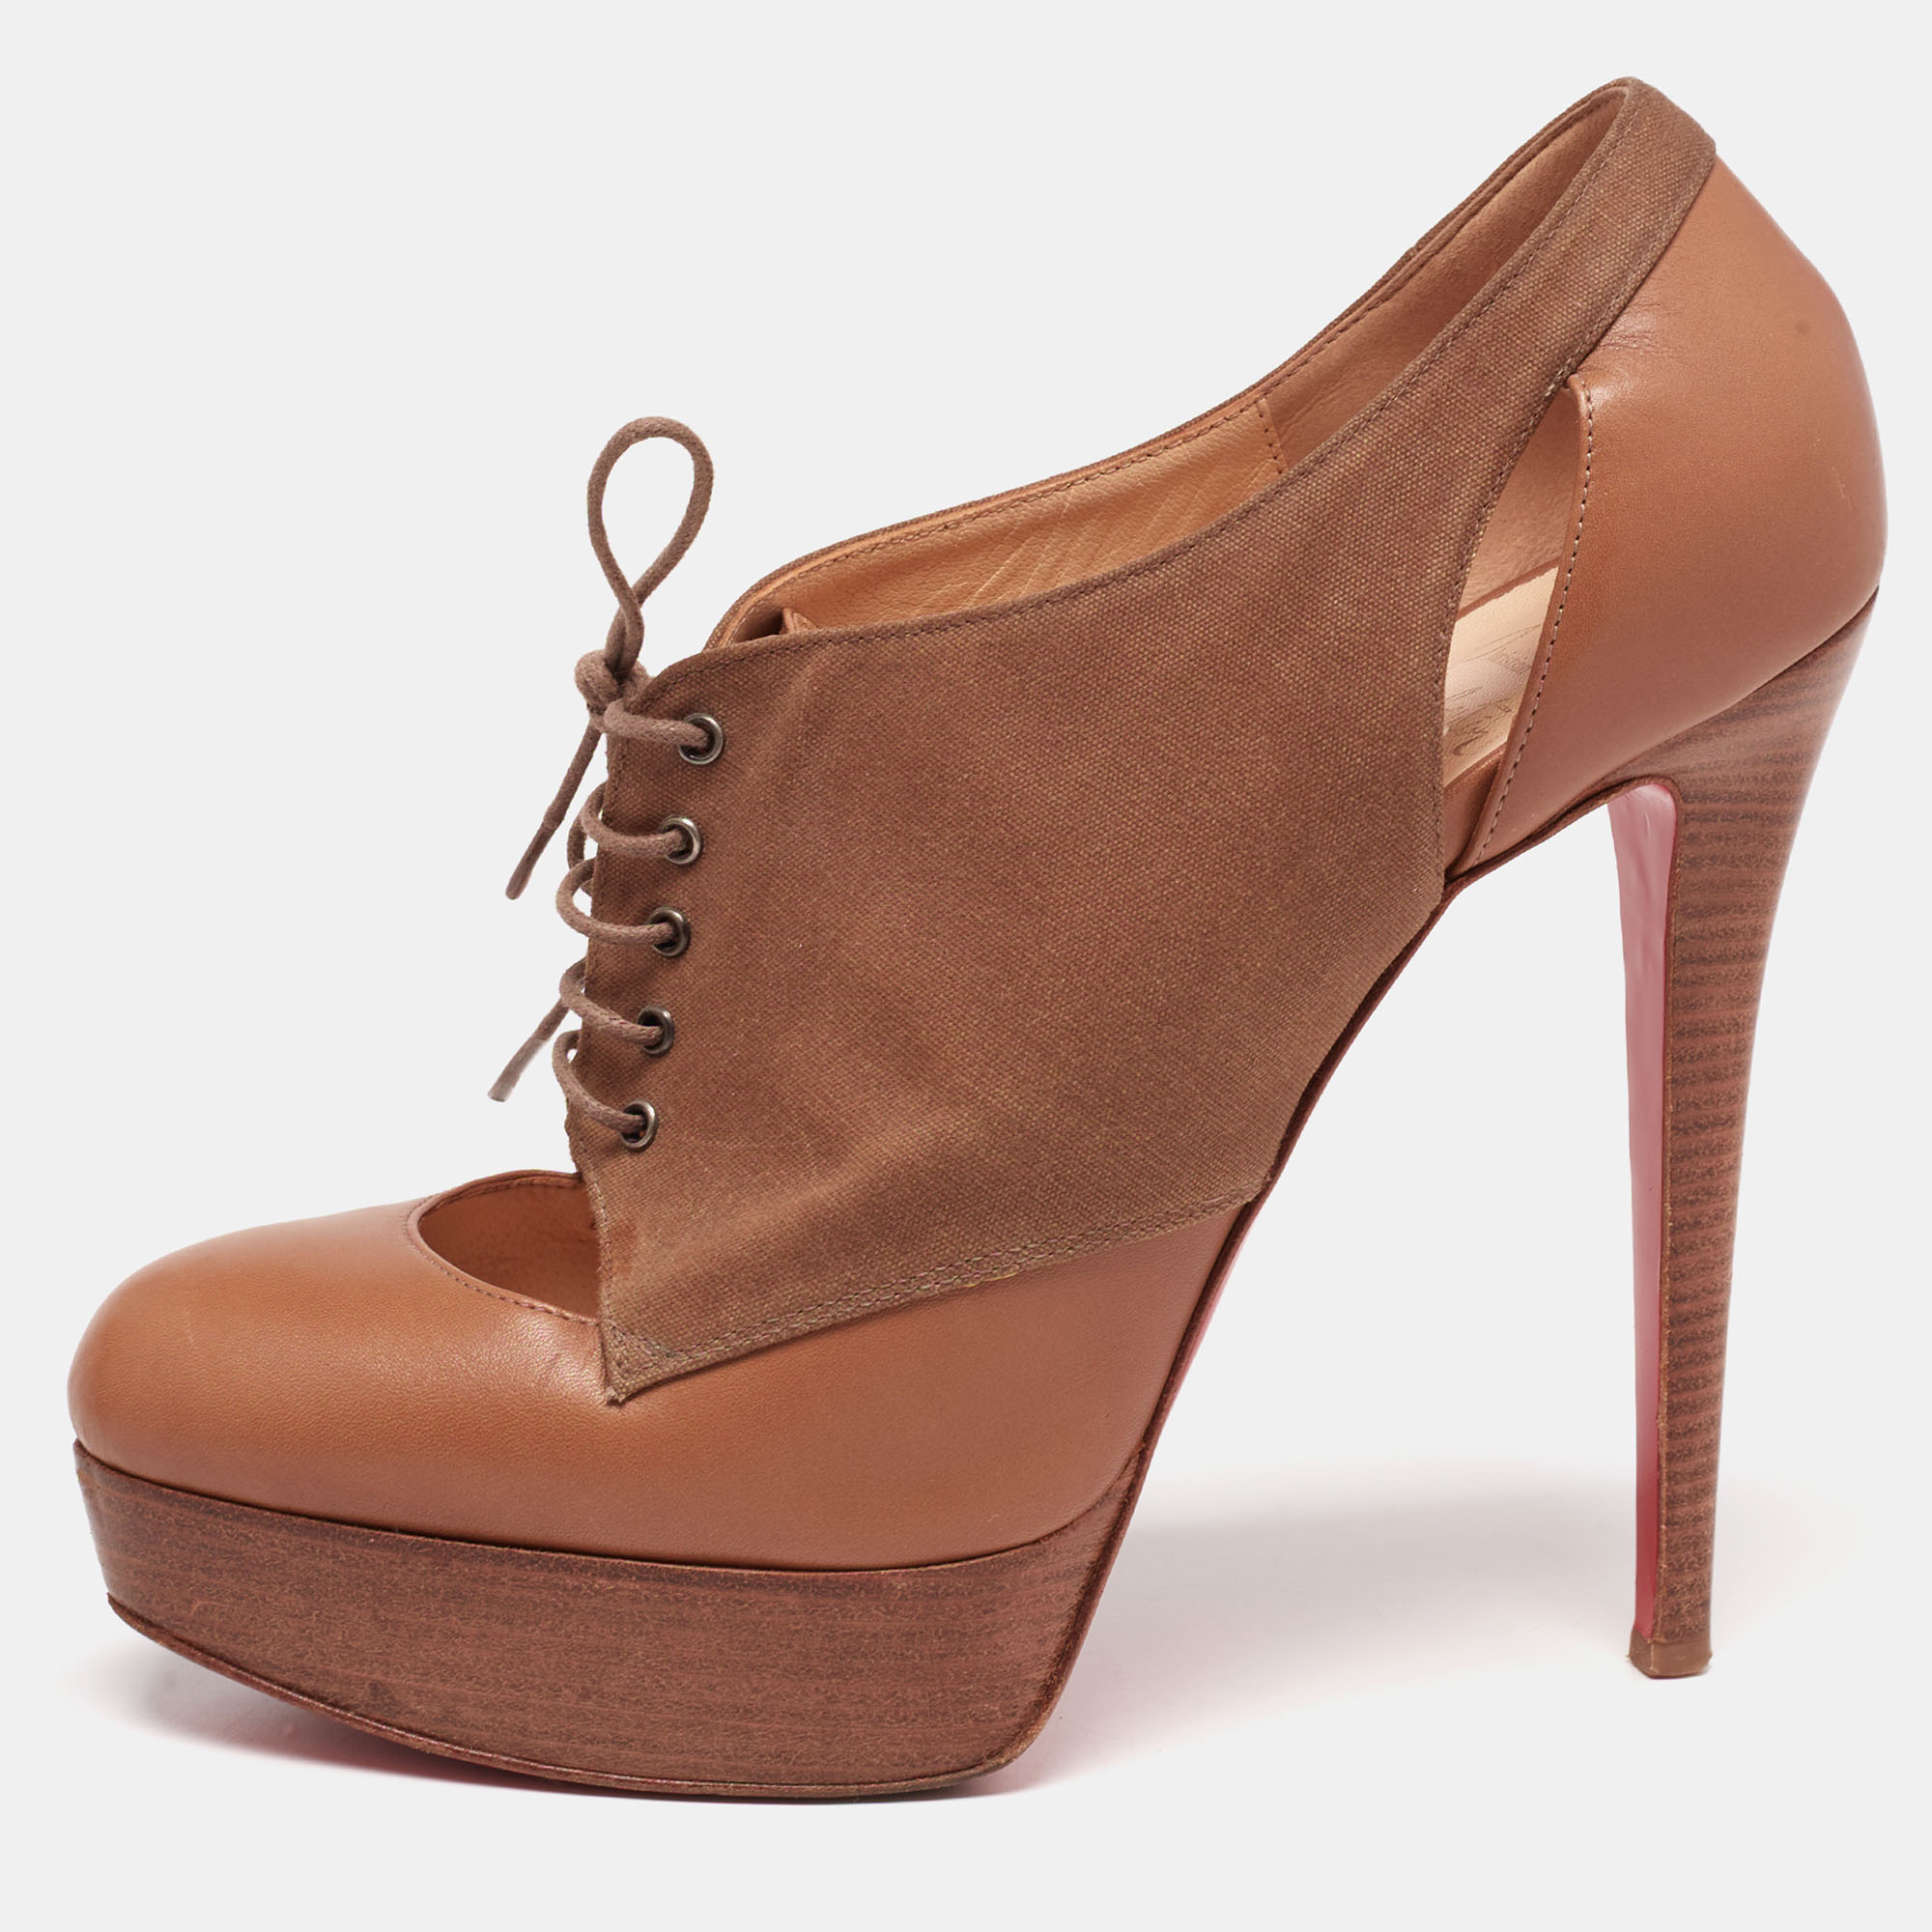 Christian louboutin tan/brown leather and canvas lace-up ankle booties size 39.5